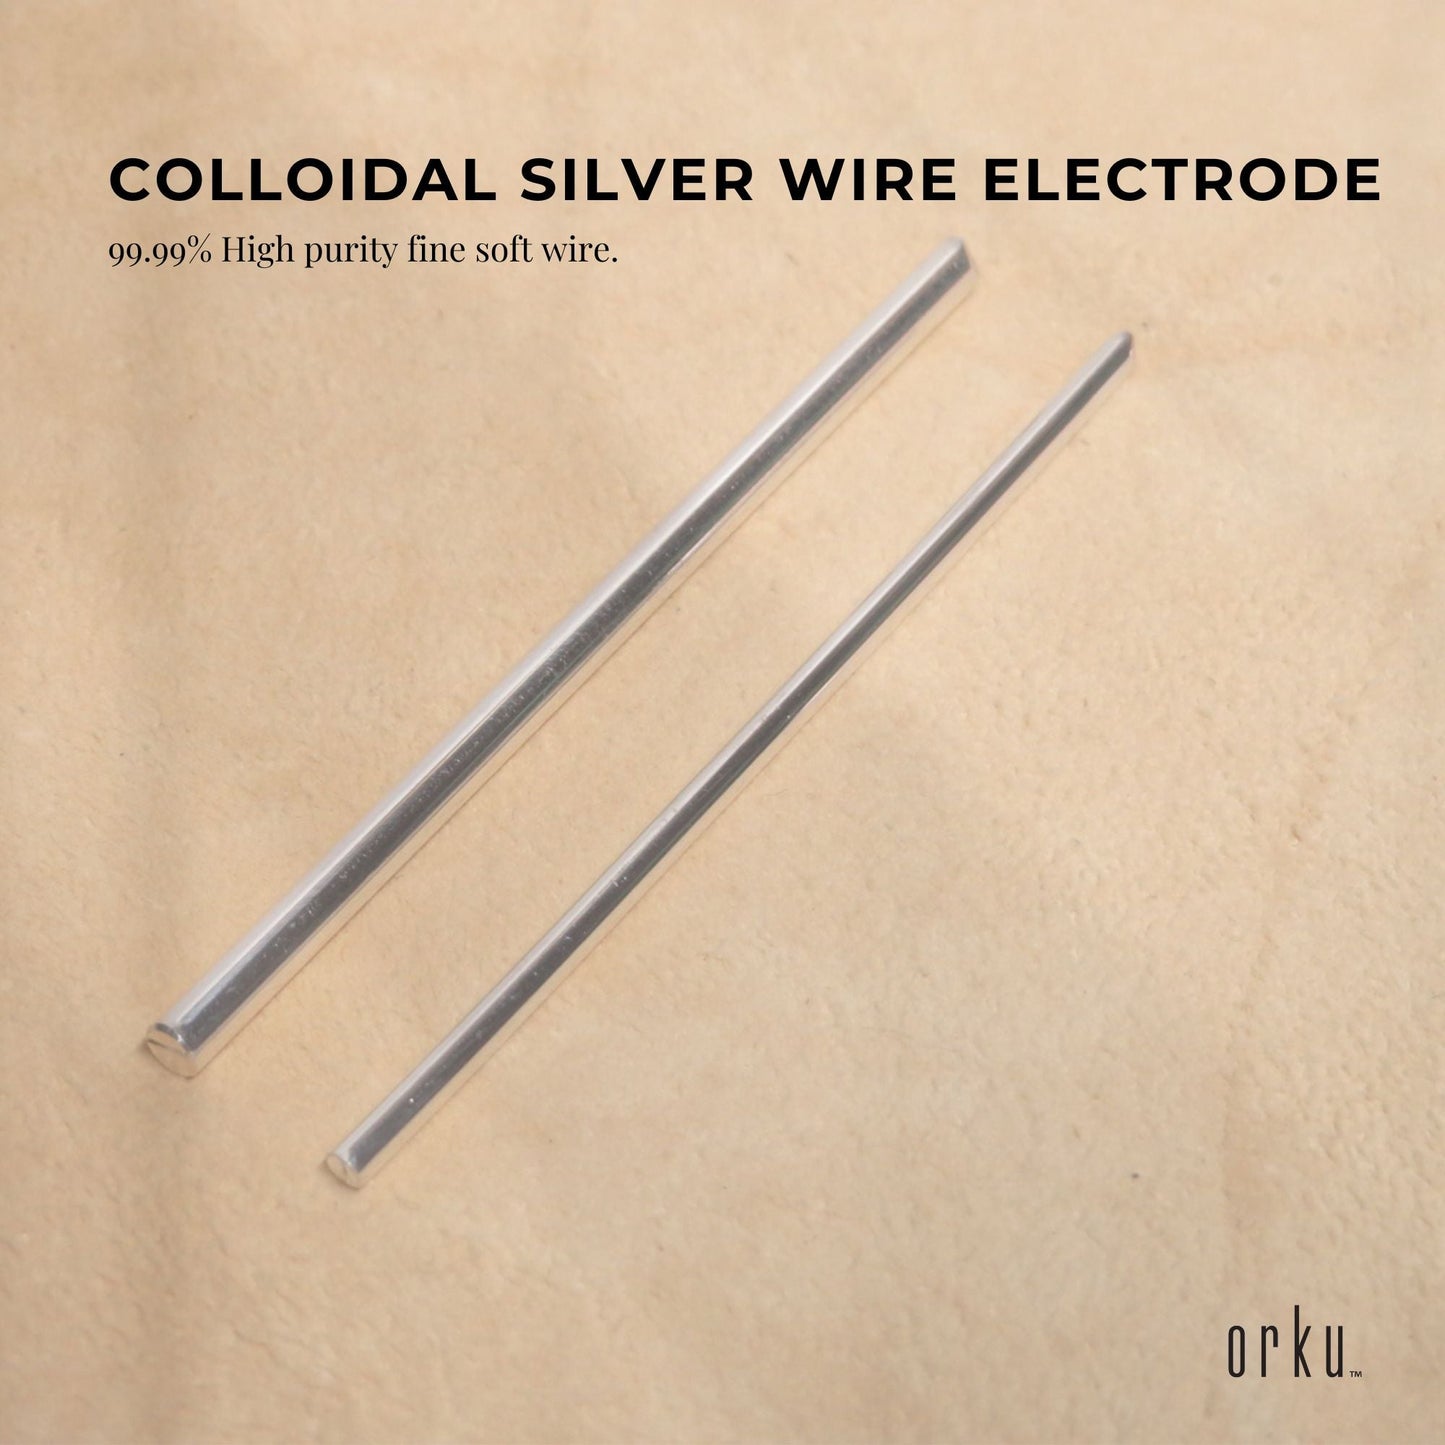 1x 8" Silver Rods 18 Gauge 99.99% High Purity Fine Soft Wire Colloidal Electrode